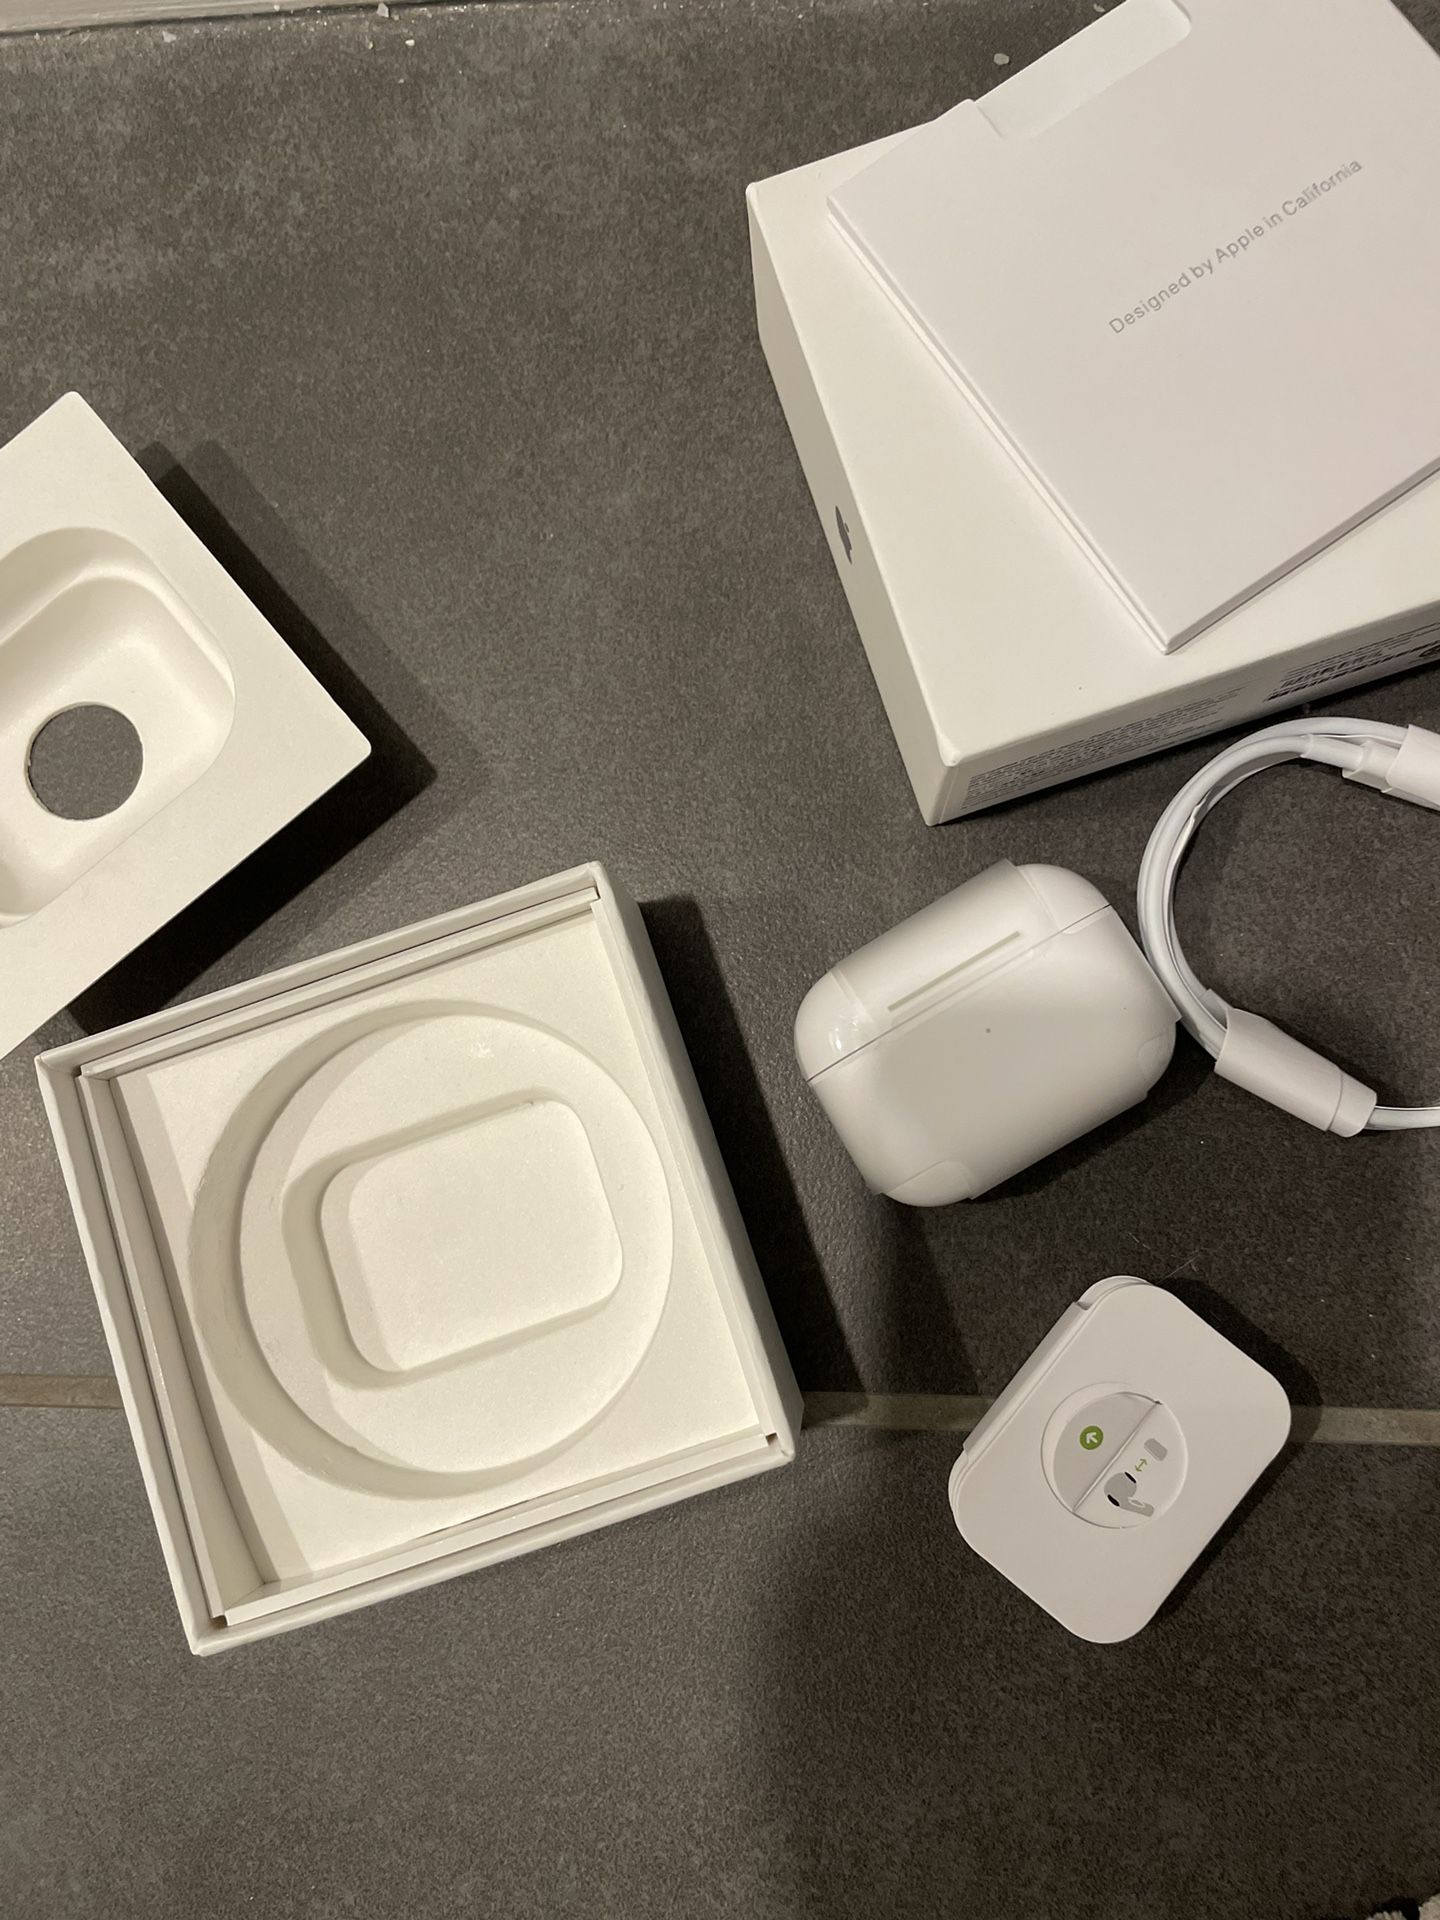 Apple AirPods Pro 2nd Generation with MagSafe Wireless Charging Case - White *best offer*